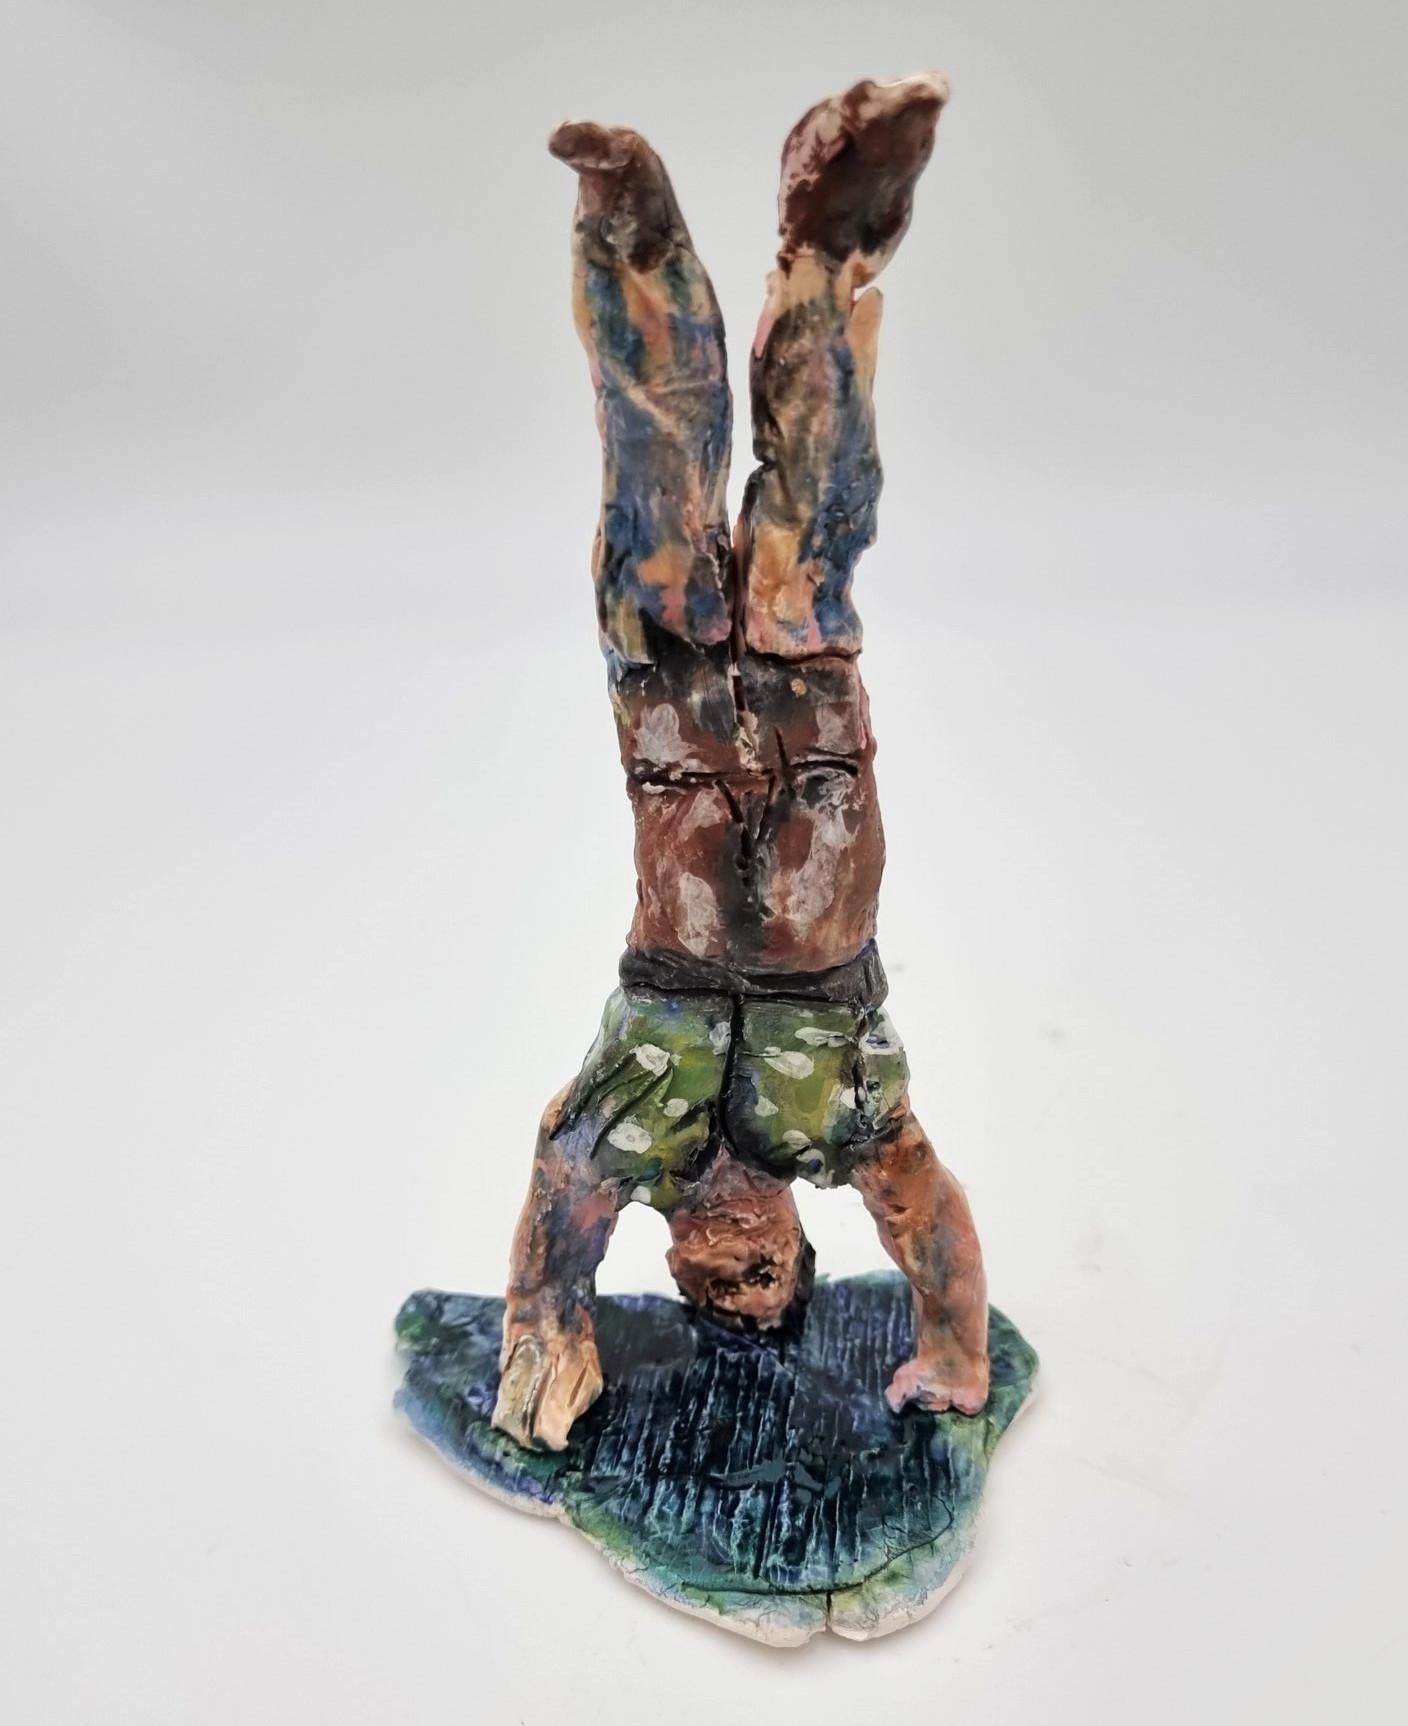 Headstand Acrobat (Circus, Whimsical, Viola Frey, Delicate, Playful, Fun) - Sculpture by Ann Rothman